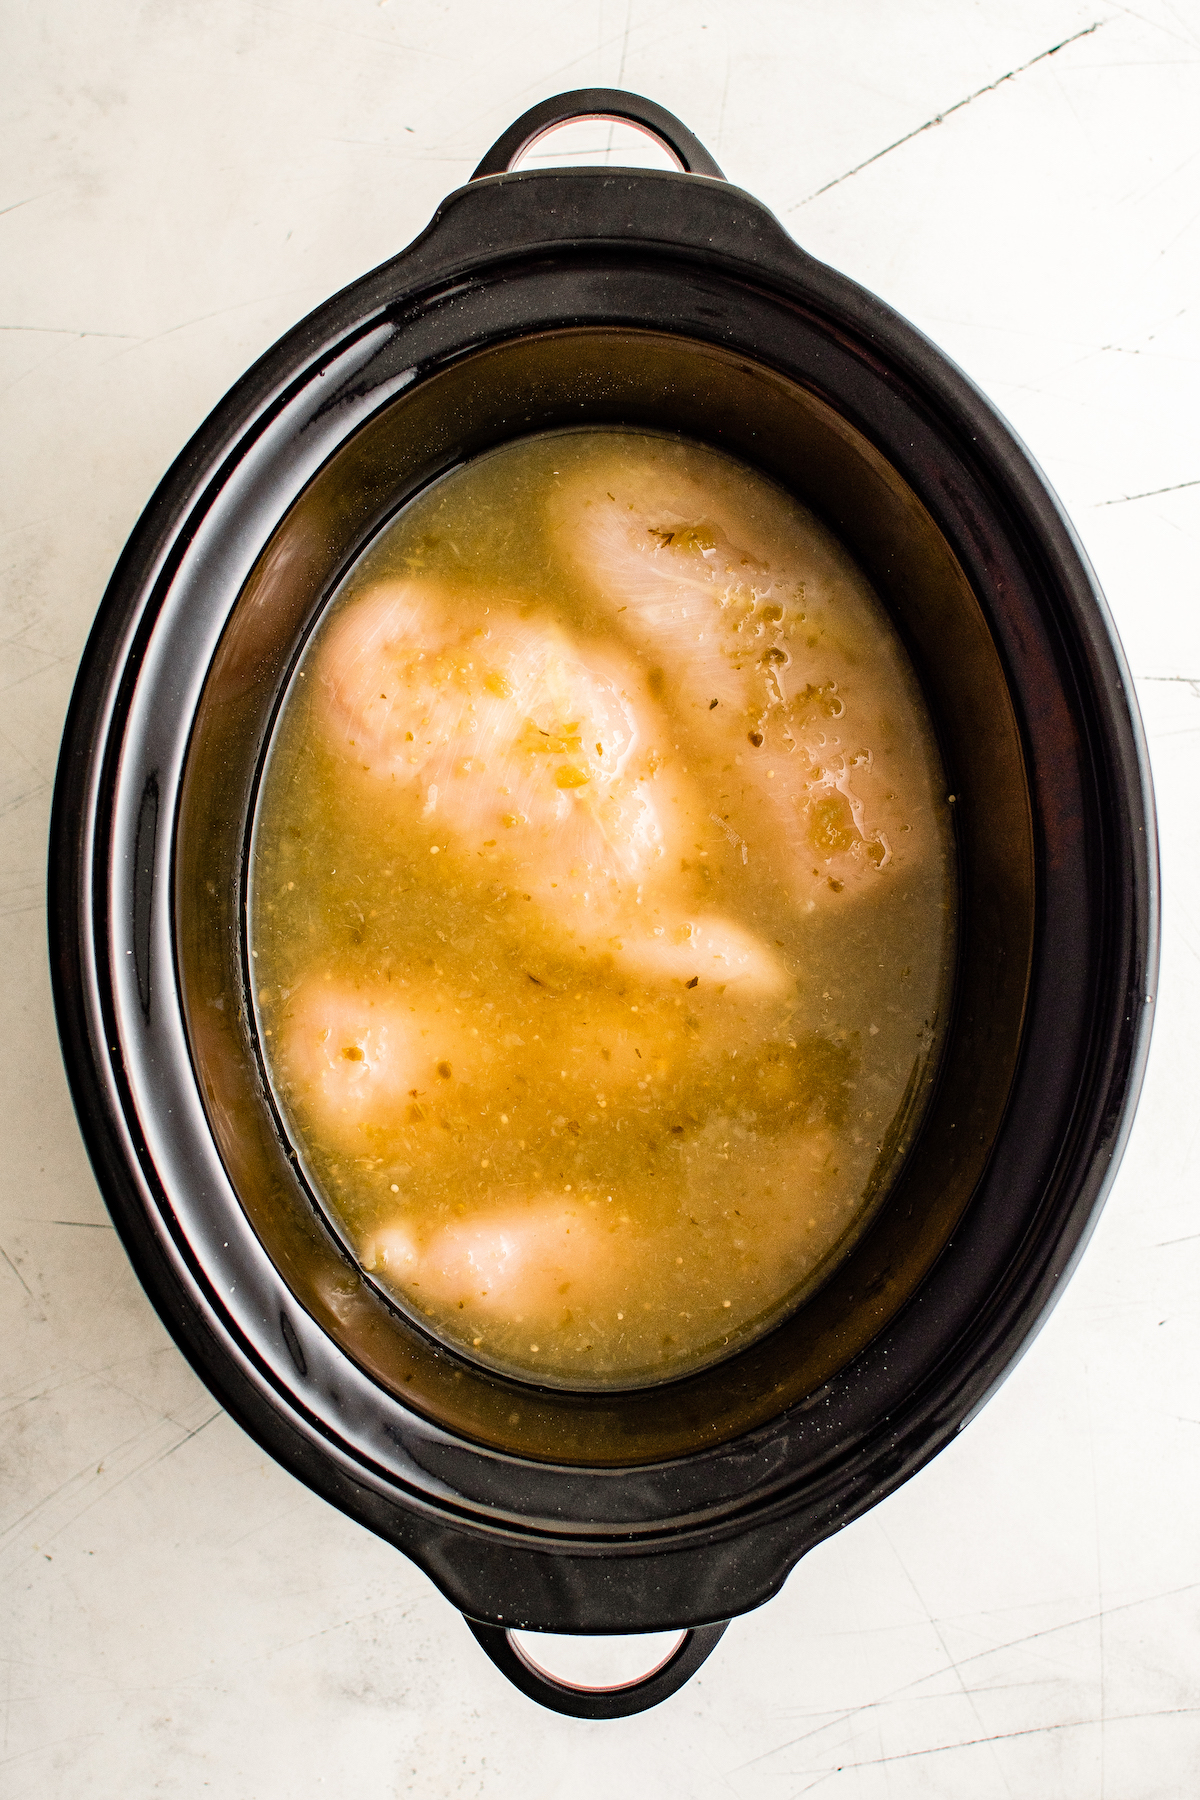 Chicken breasts in chicken broth and green salsa in a crockpot.